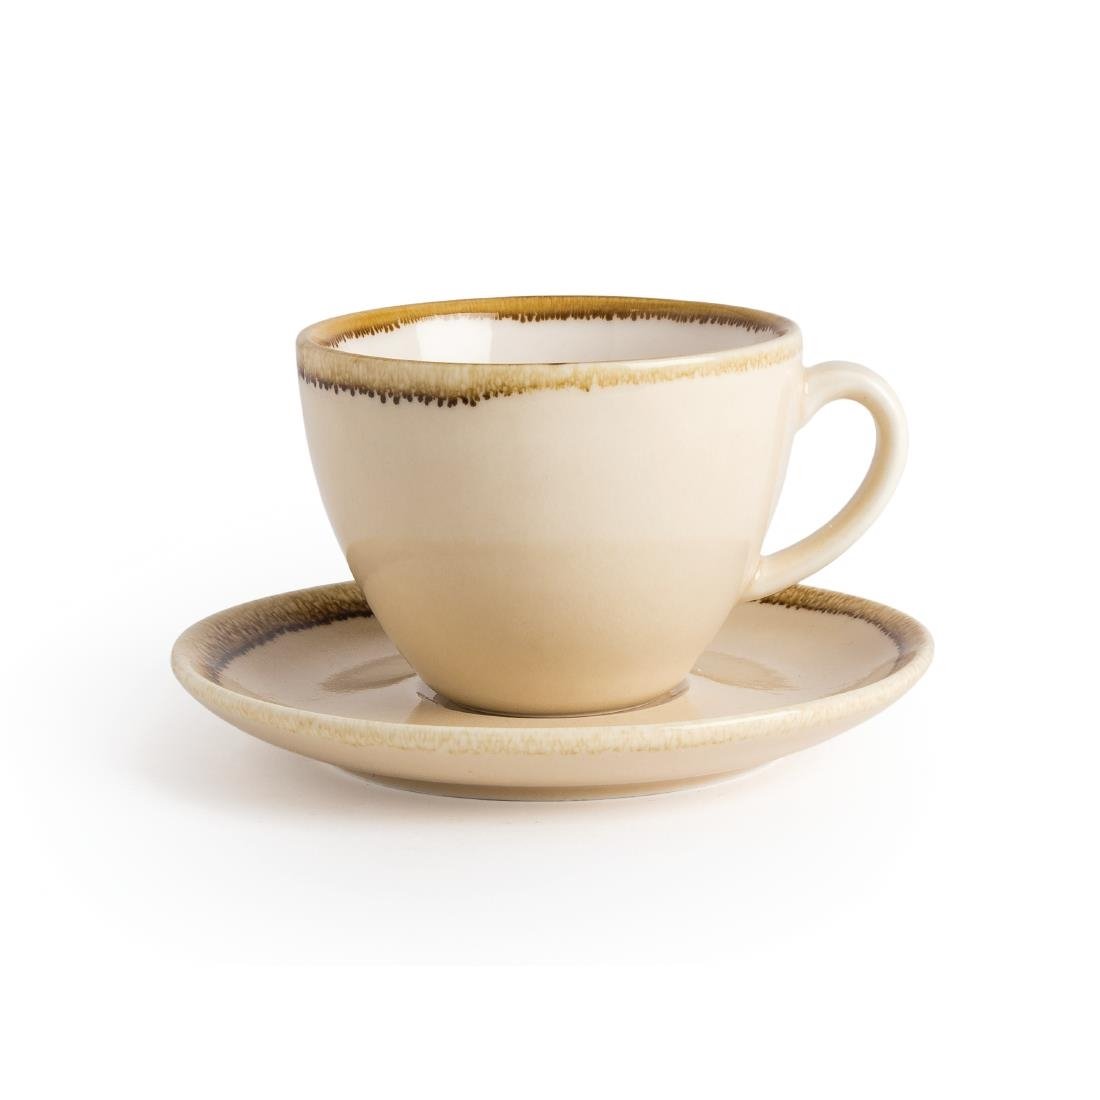 GP331 Olympia Kiln Cappuccino Saucer Sandstone 140mm (Pack of 6) JD Catering Equipment Solutions Ltd